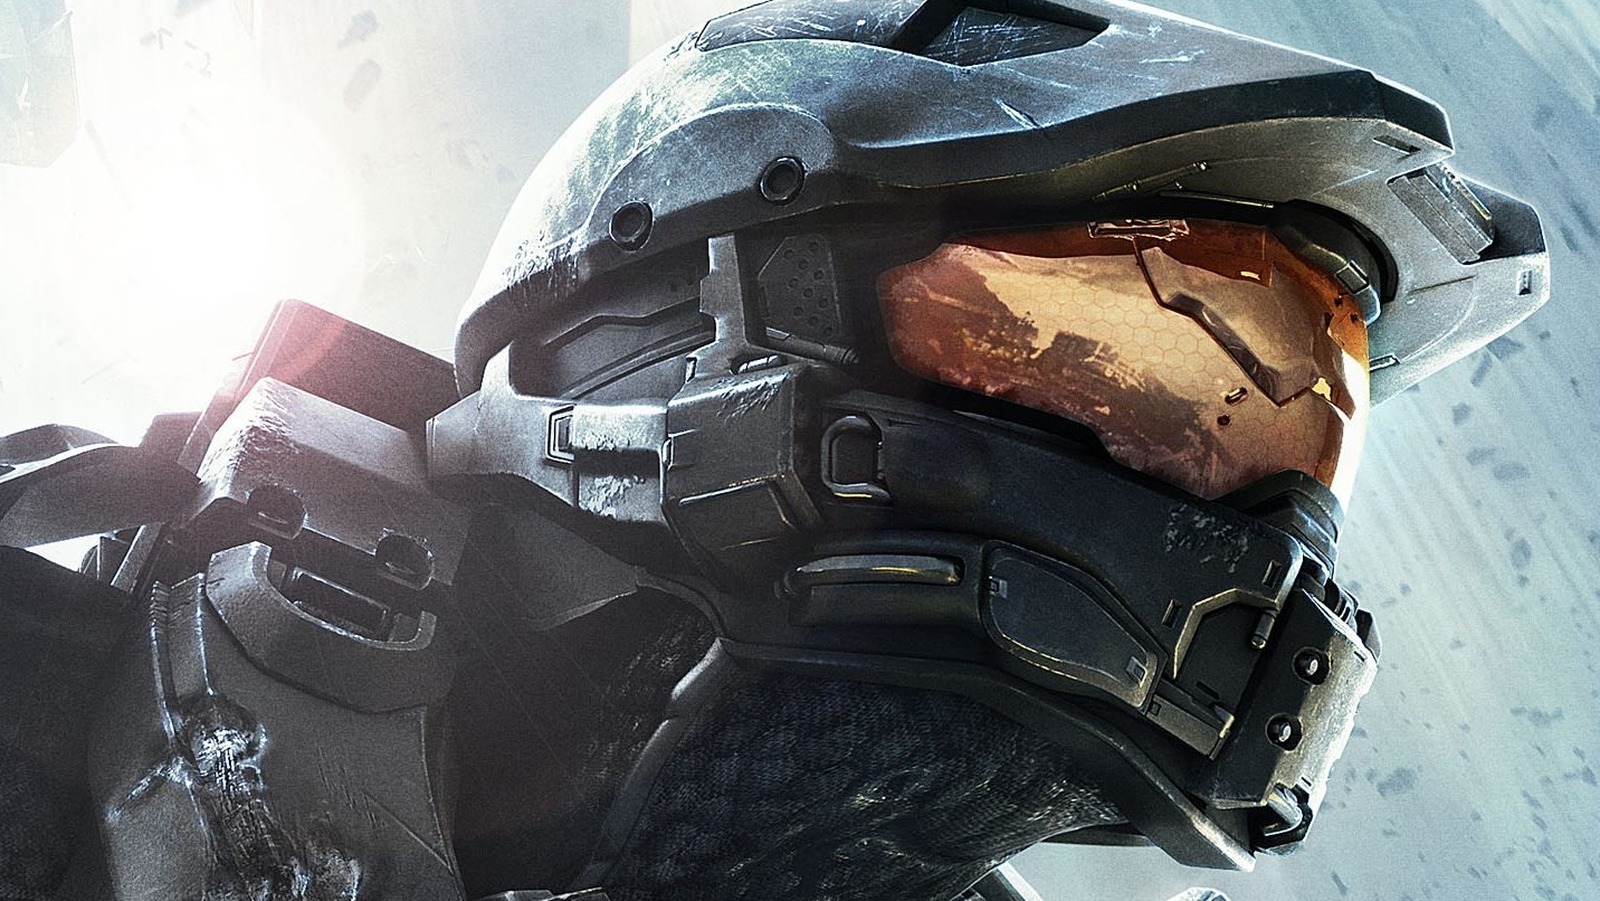 Halo: The Master Chief Collection Preview - The Unexpected